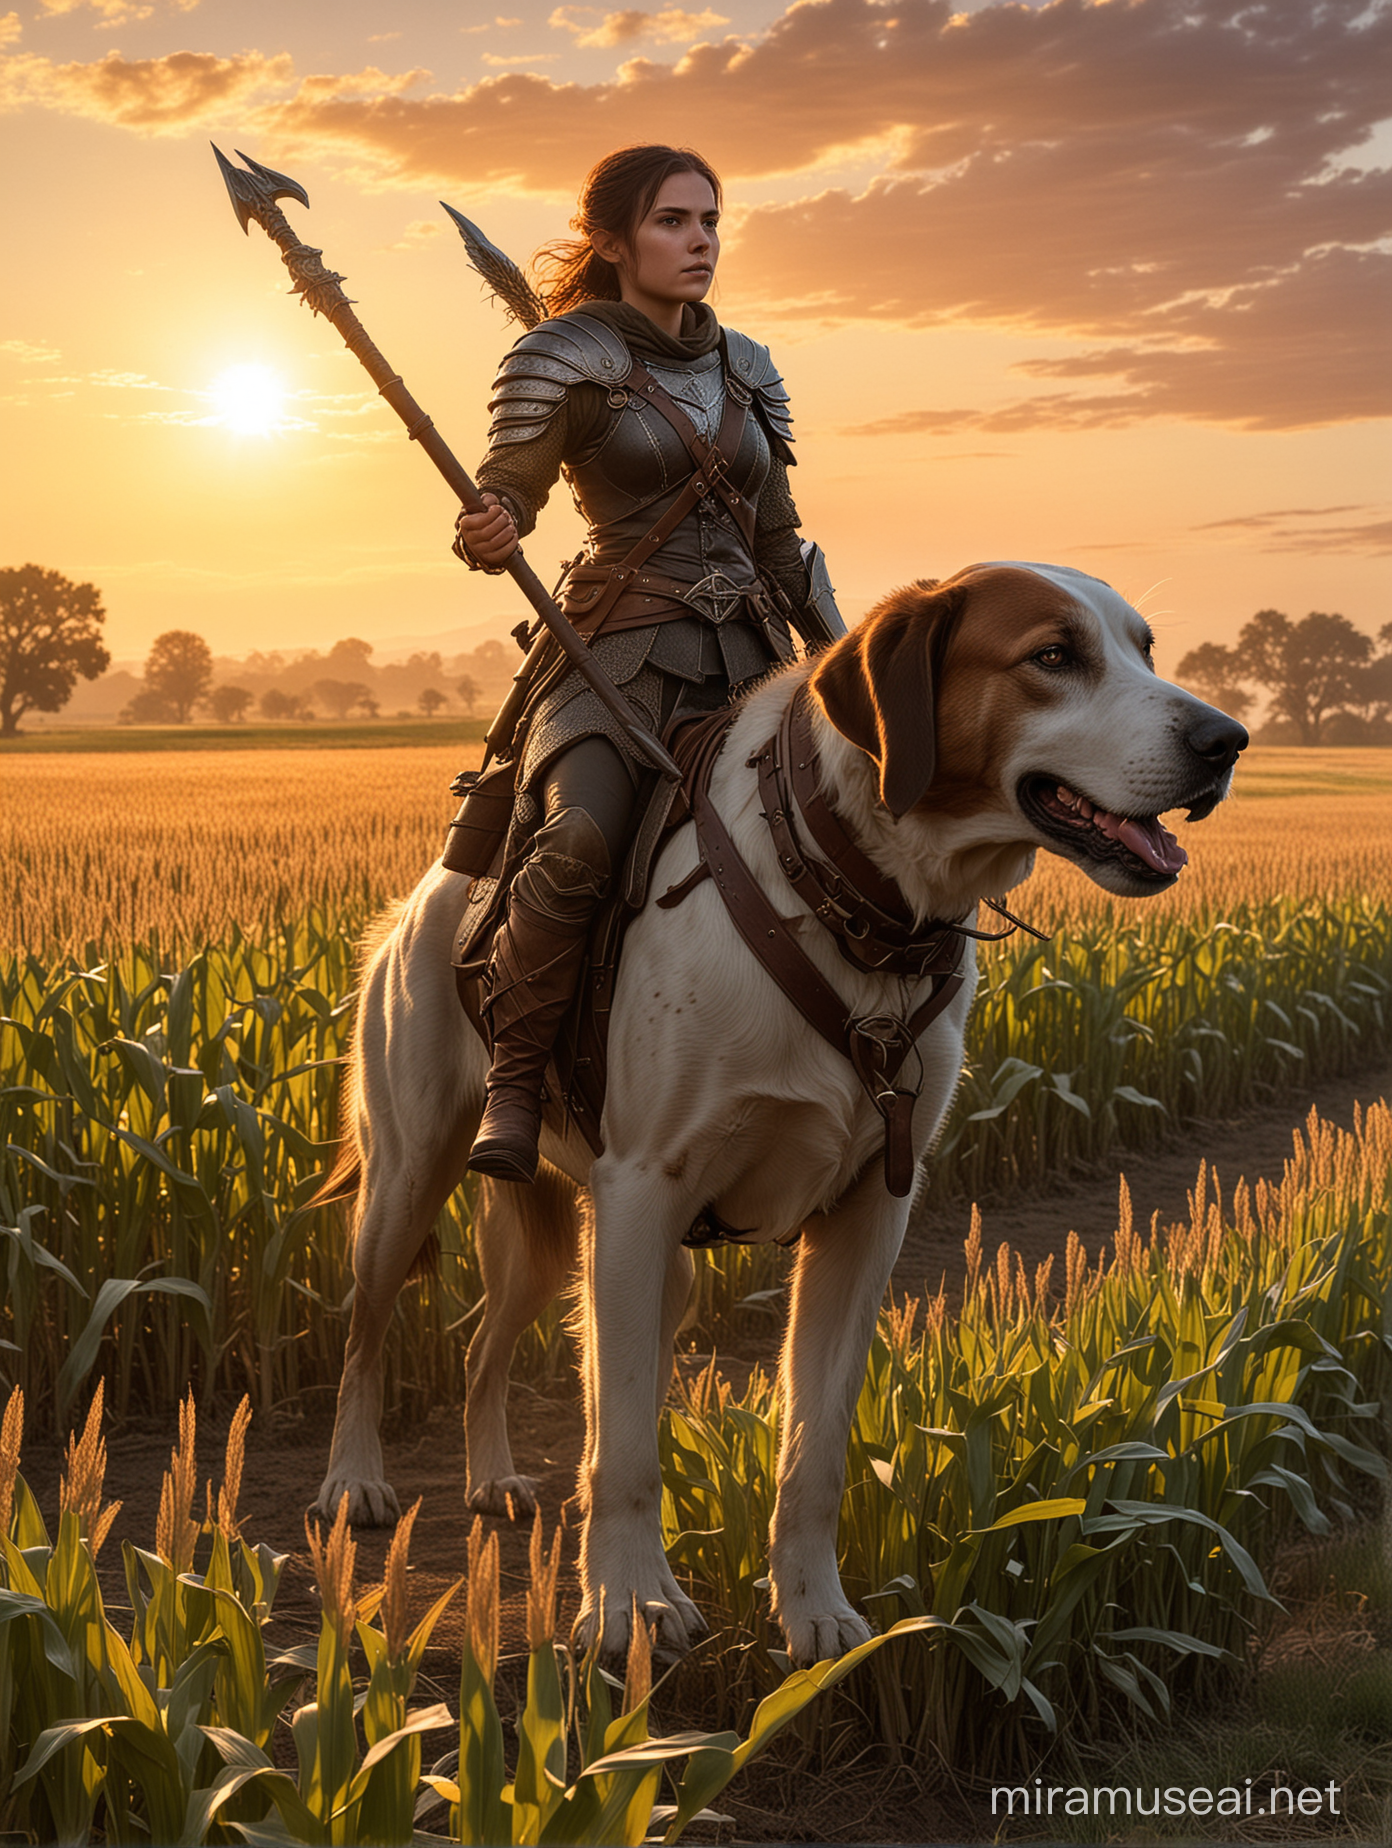 A female halfling outrider mounted on a big hound. She's armed with a spear and she's standing in a corn field by sunset.